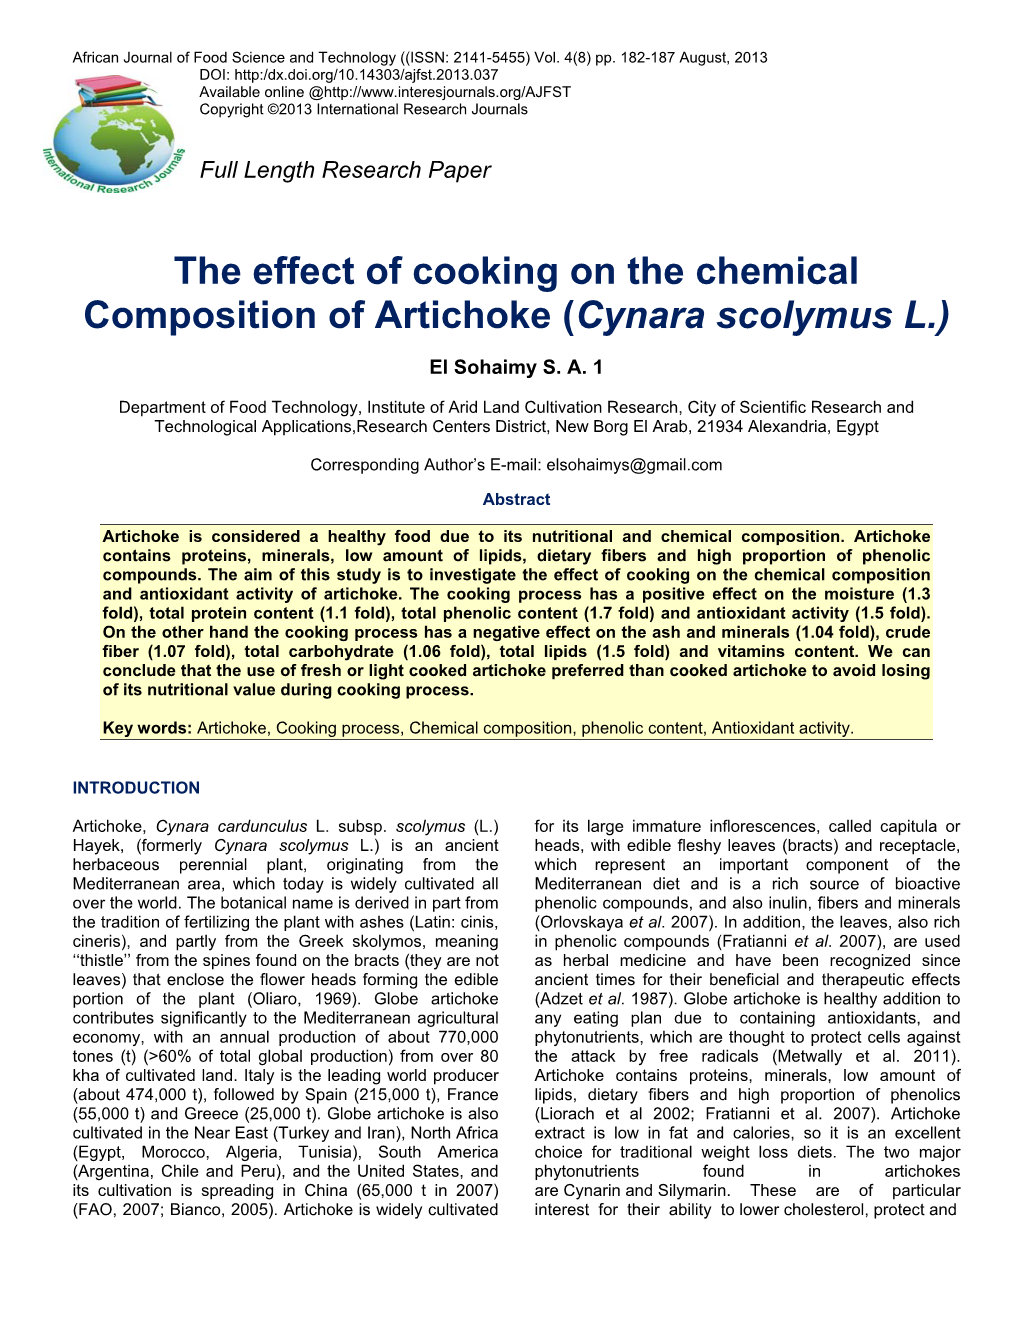 The Effect of Cooking on the Chemical Composition of Artichoke (Cynara Scolymus L.)